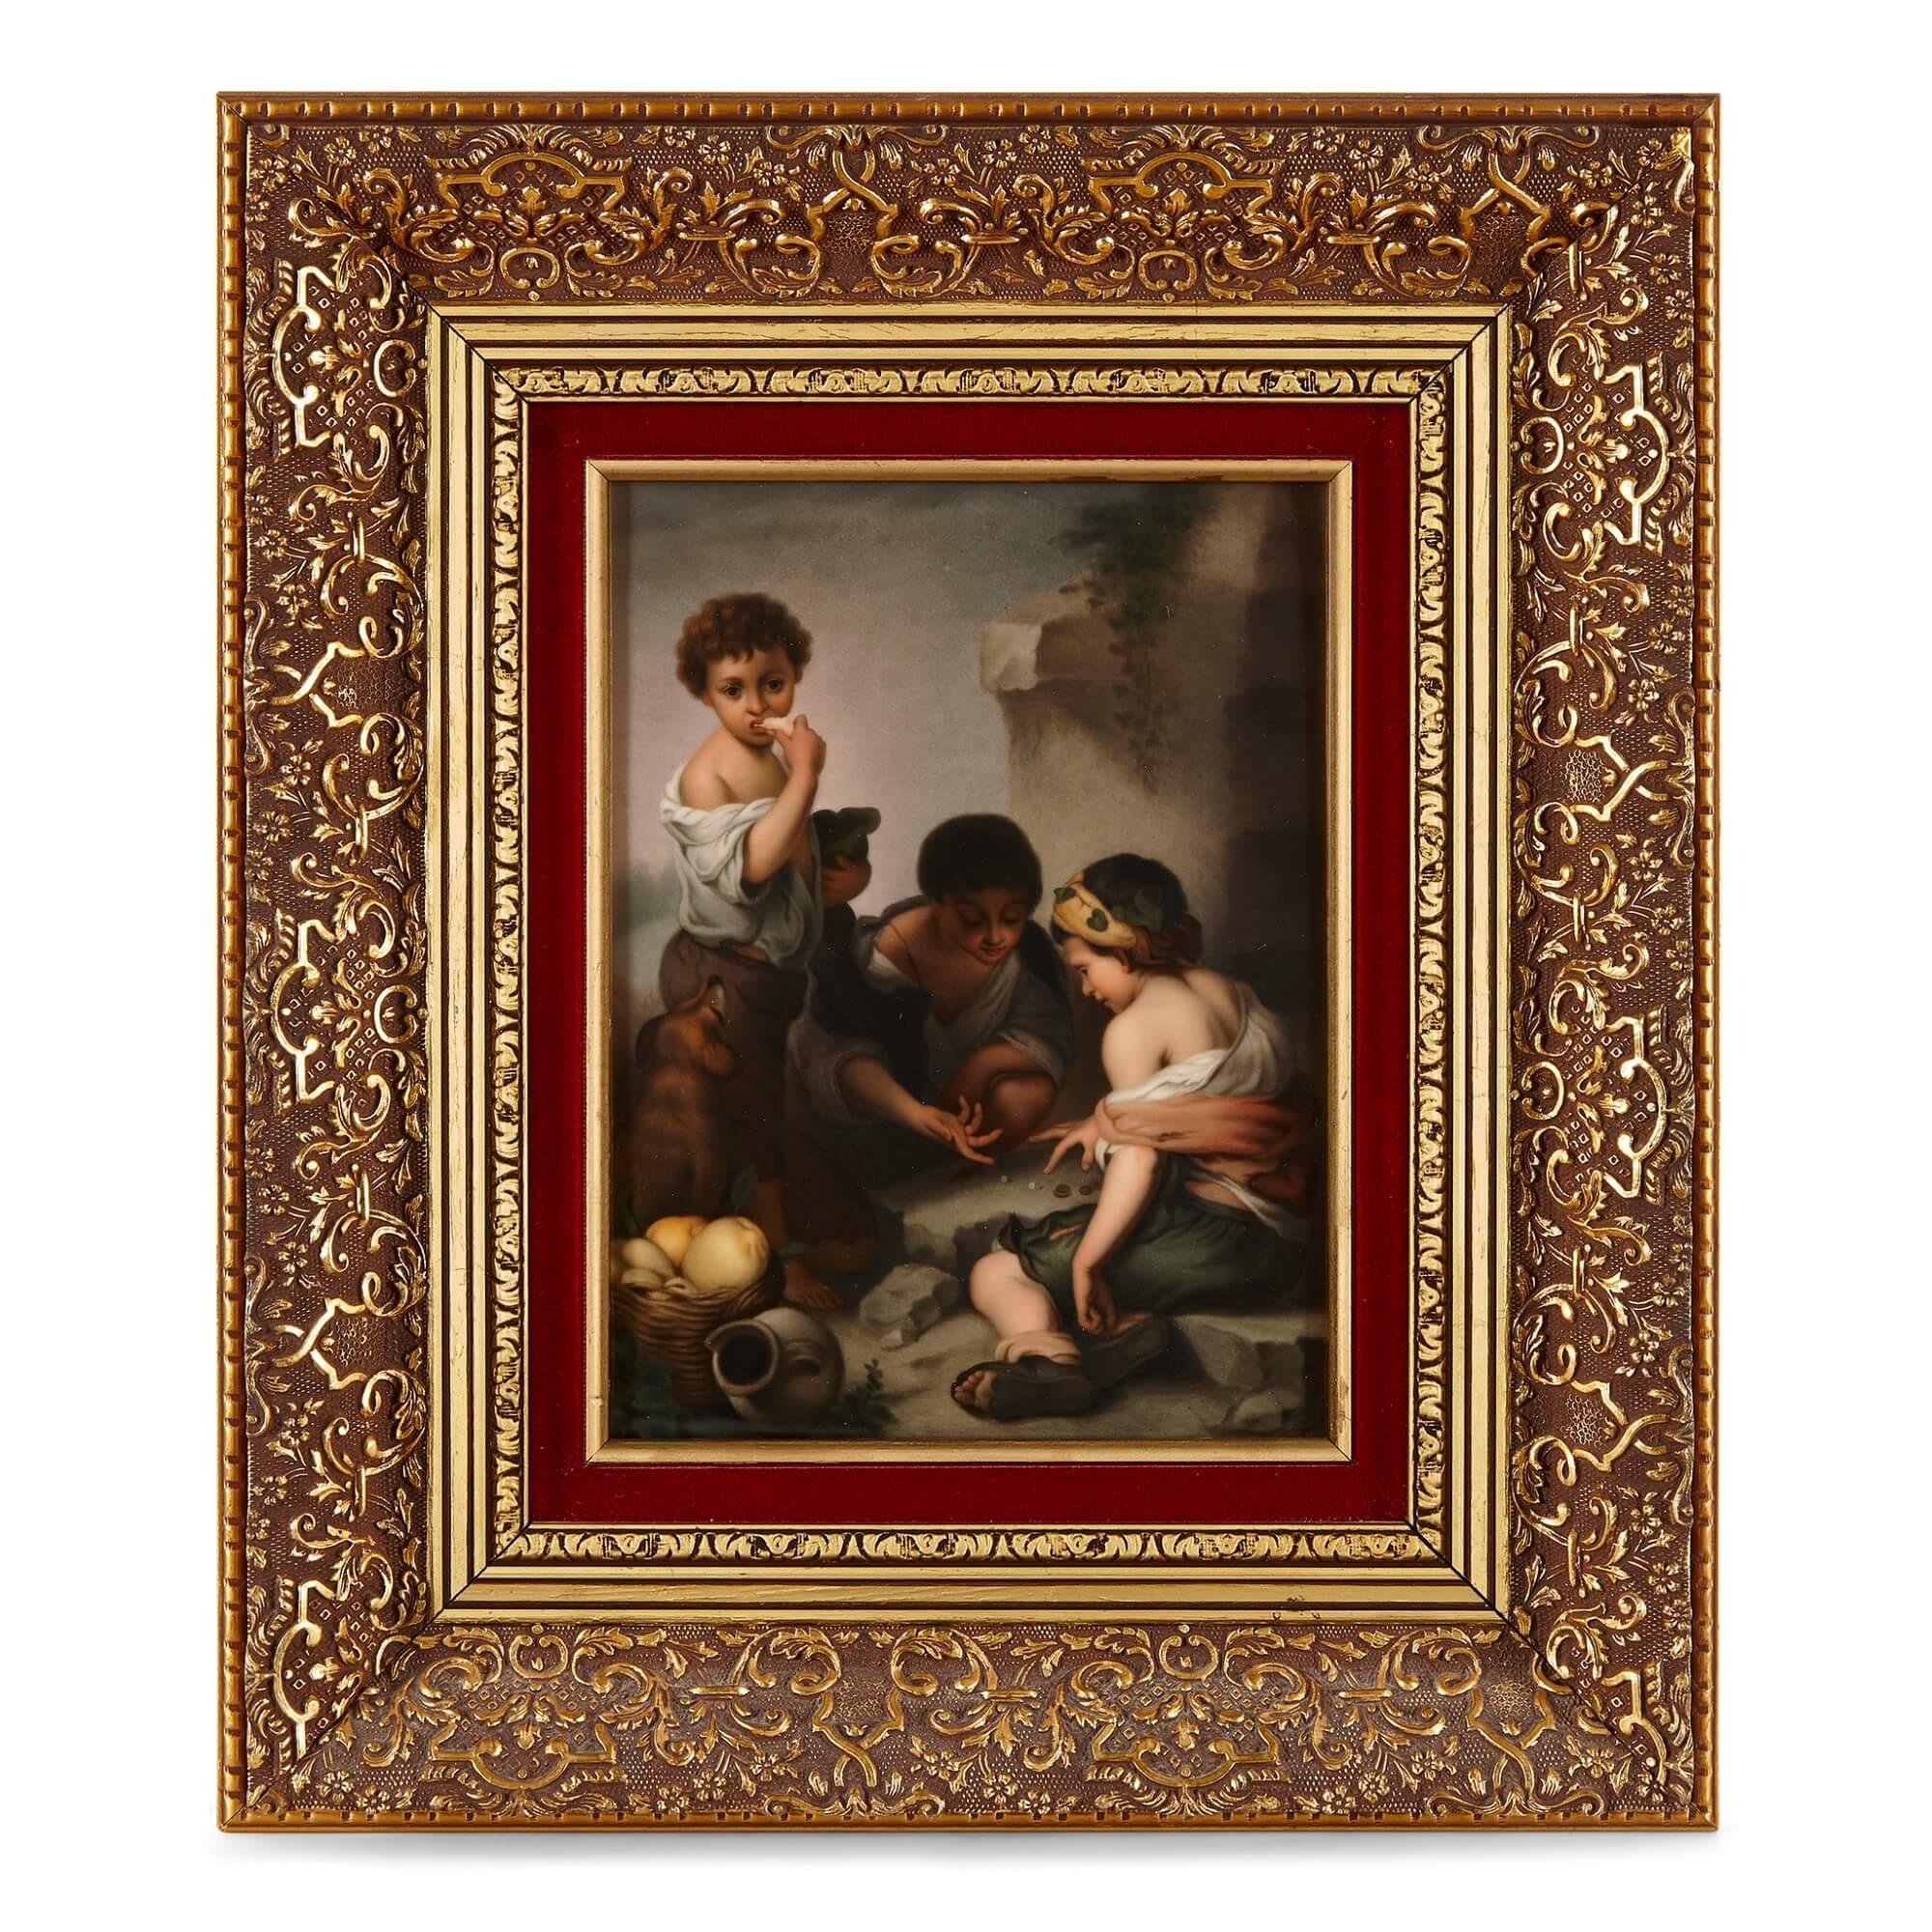 Pair of KPM porcelain plaques after Spanish Baroque paintings by Murillo
German, Late 19th Century
Plaques: Height 25cm, width 19cm, depth 0.5cm
Frames: 43cm, width 37cm, depth 4cm

Finely painted, these plaques form a pair of works by